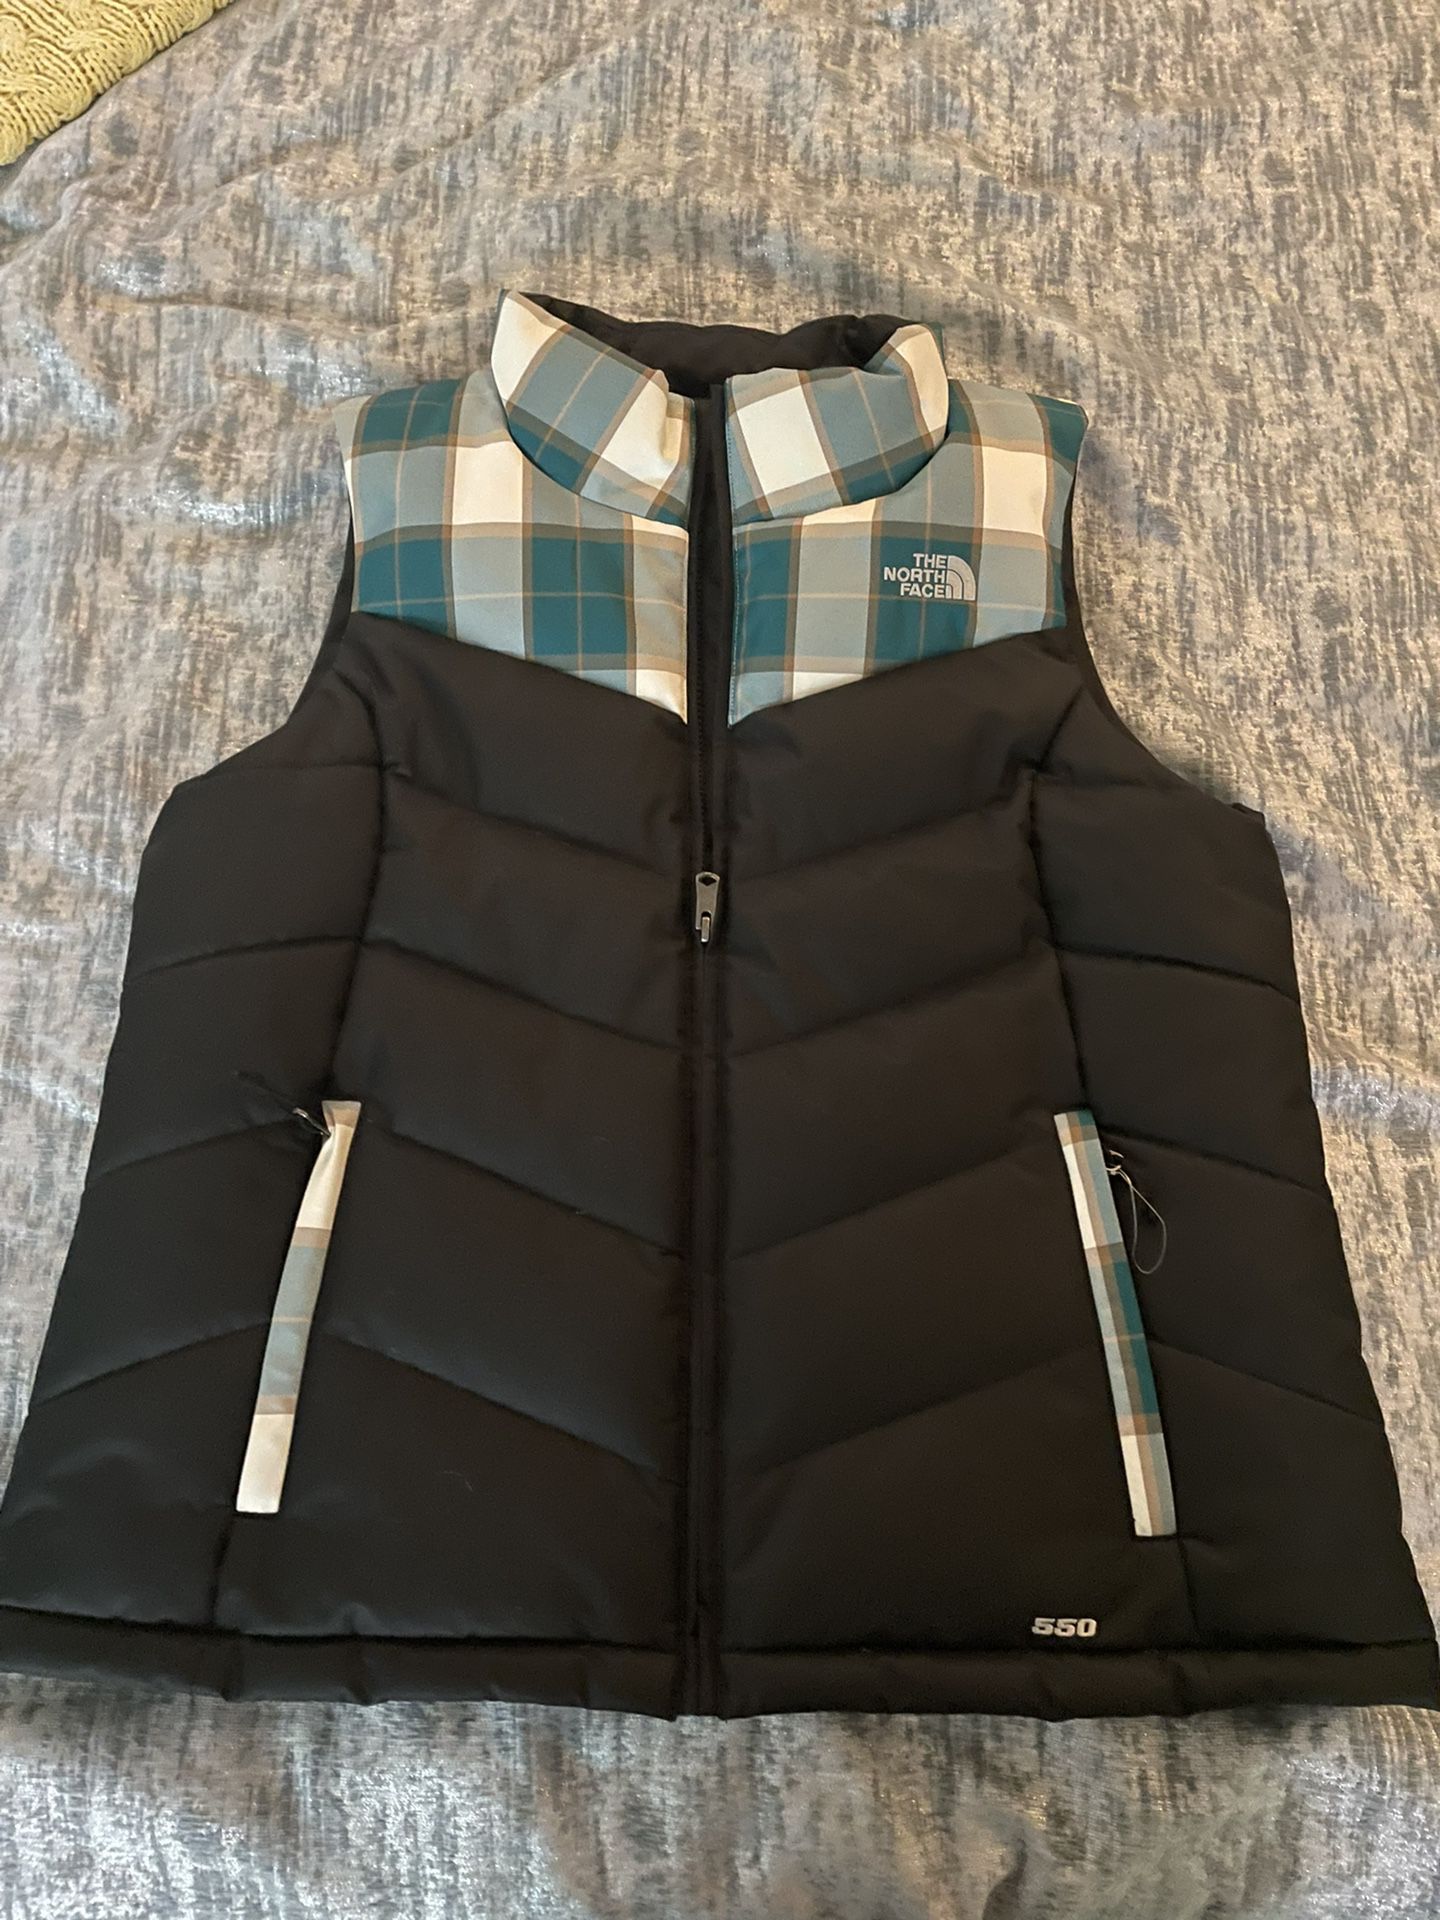 New North Face Vest Puffer Women’s Size Large